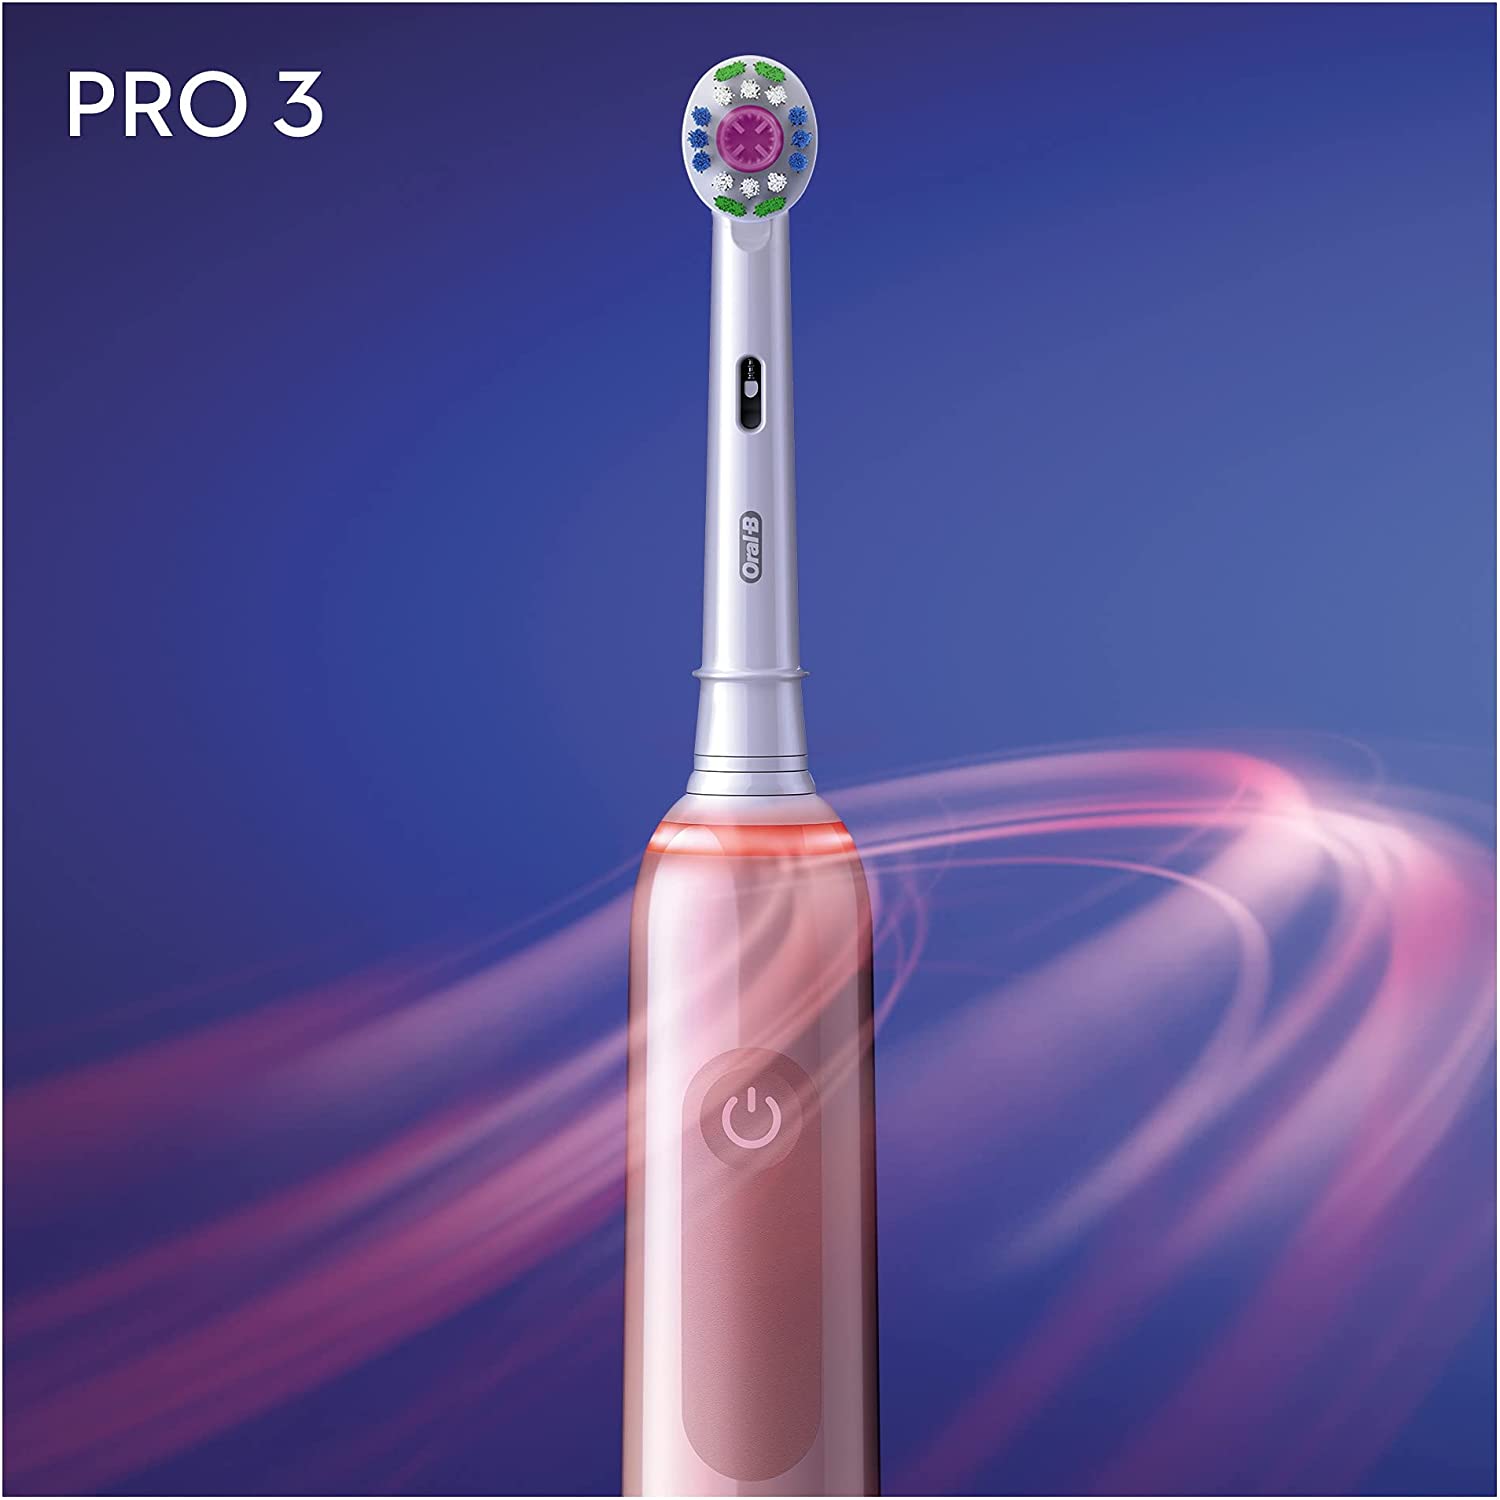 Oral-B Pro 3 - 3000 - Pink Electric Toothbrush, 1 Handle with Visible Pressure Sensor, 1 Toothbrush Head, Designed By Braun - Healthxpress.ie